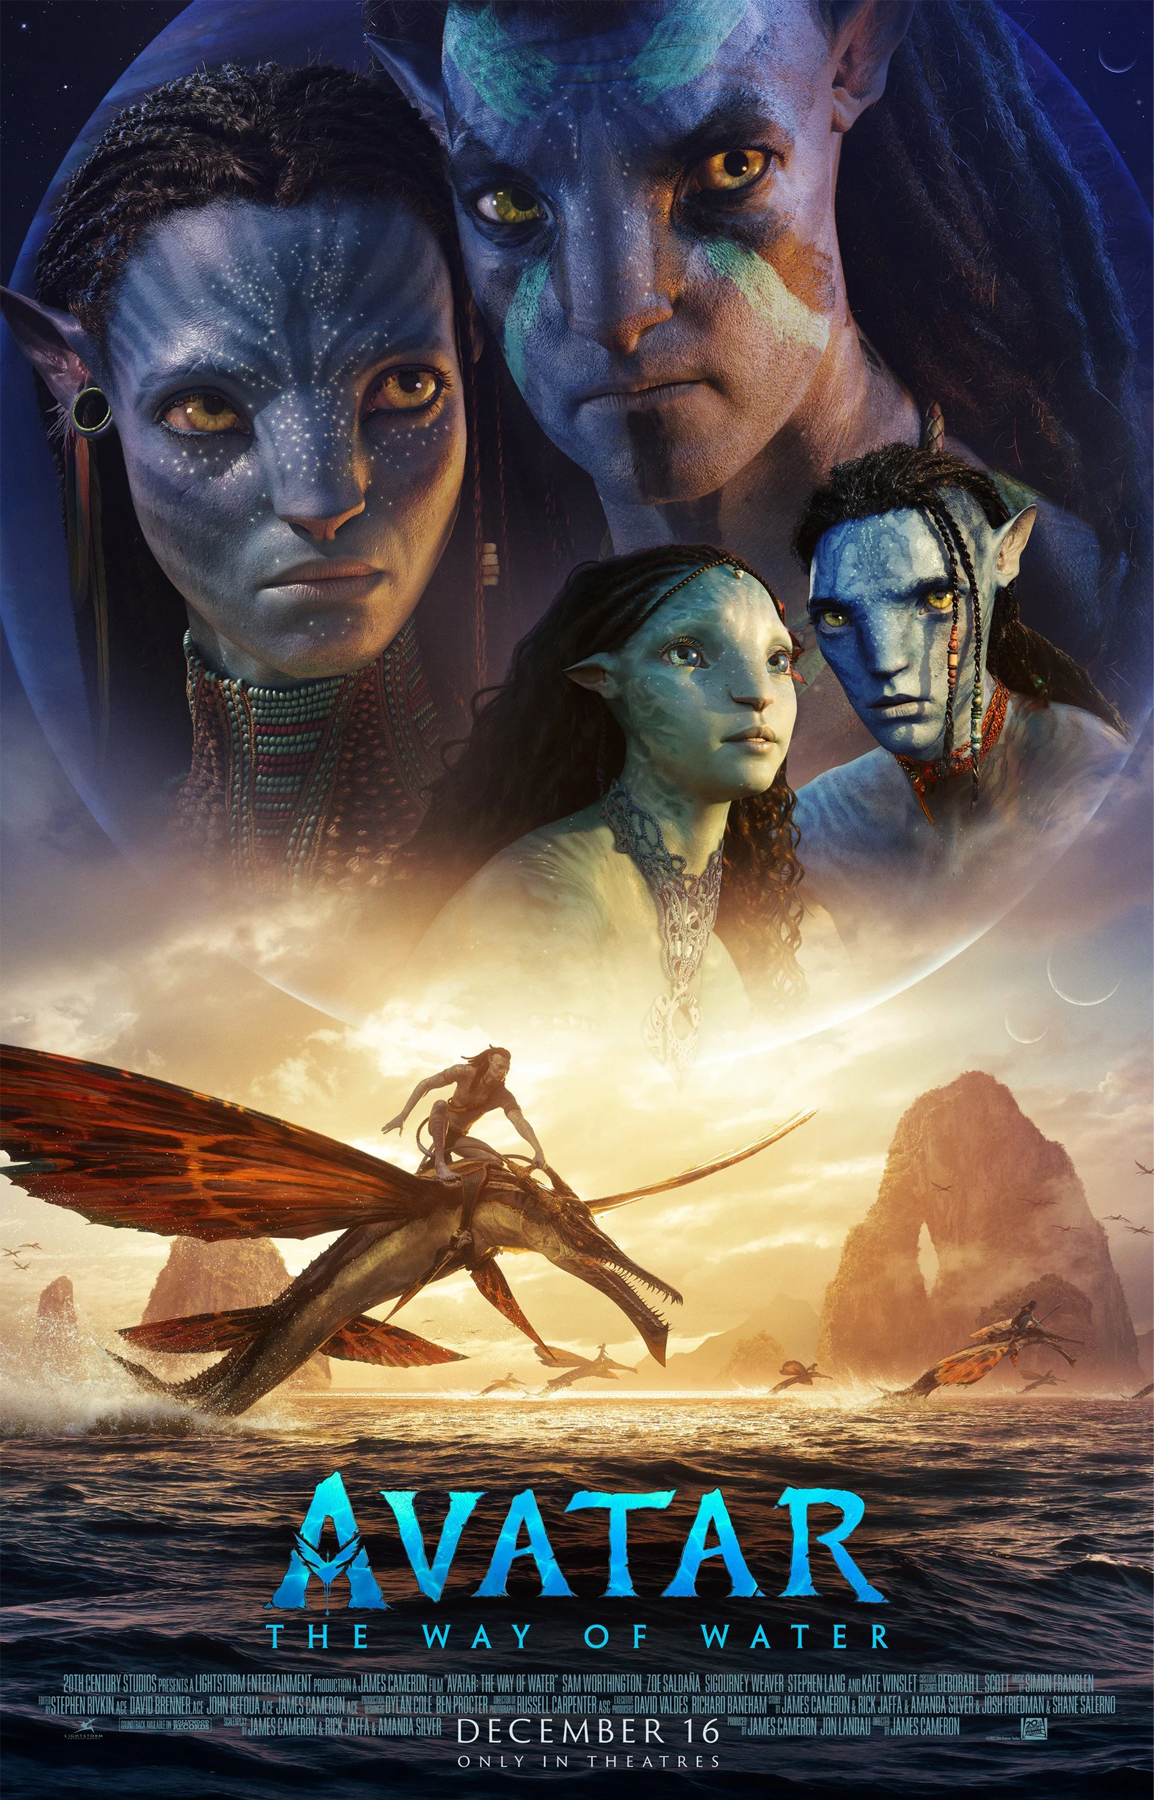 Image gallery for The King's Avatar: For the Glory - FilmAffinity